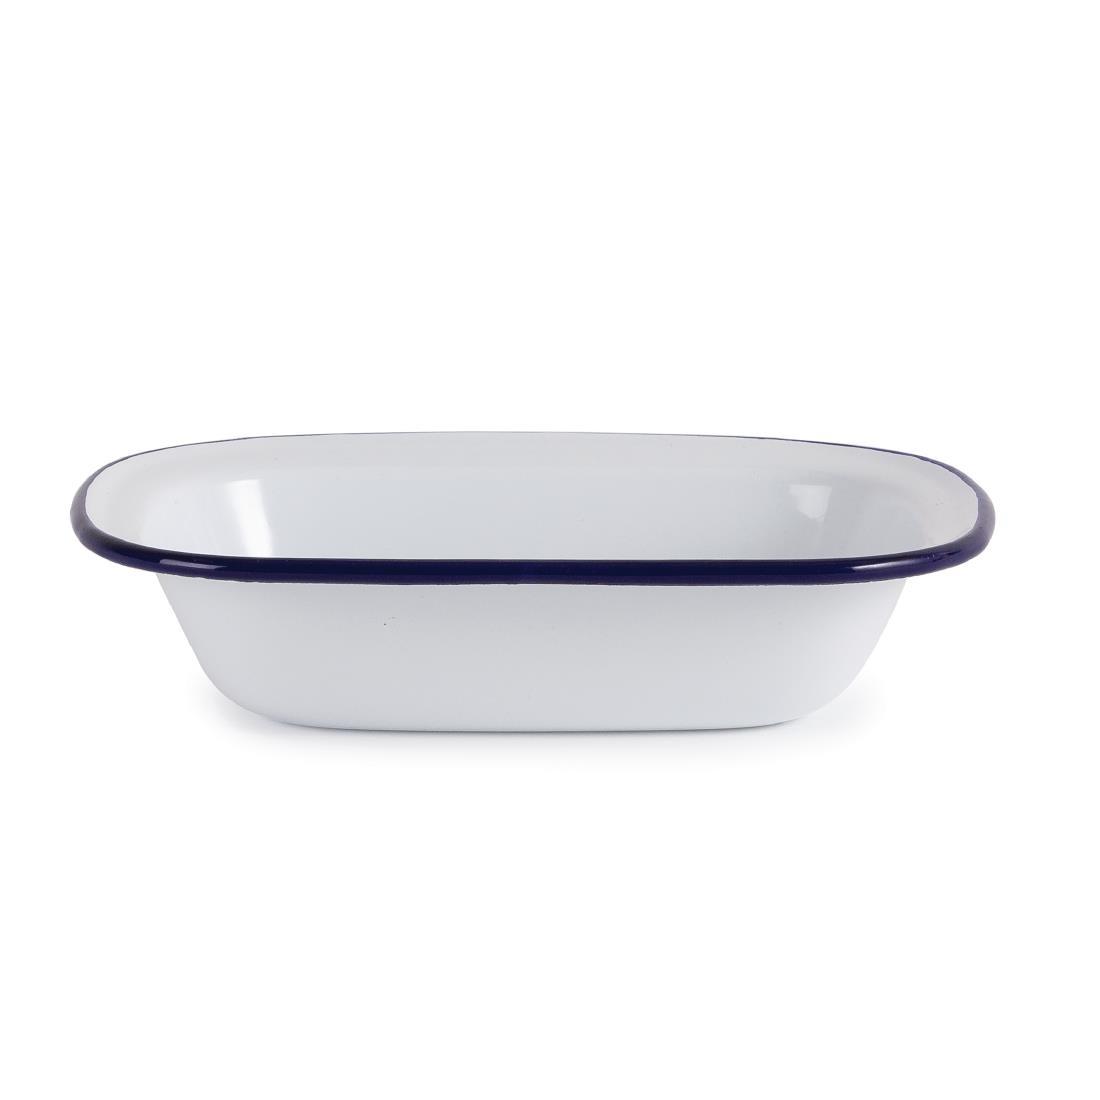 Olympia Enamel Pie Dishes Rectangular 180 x 135mm (Pack of 6) - GM511  - 5